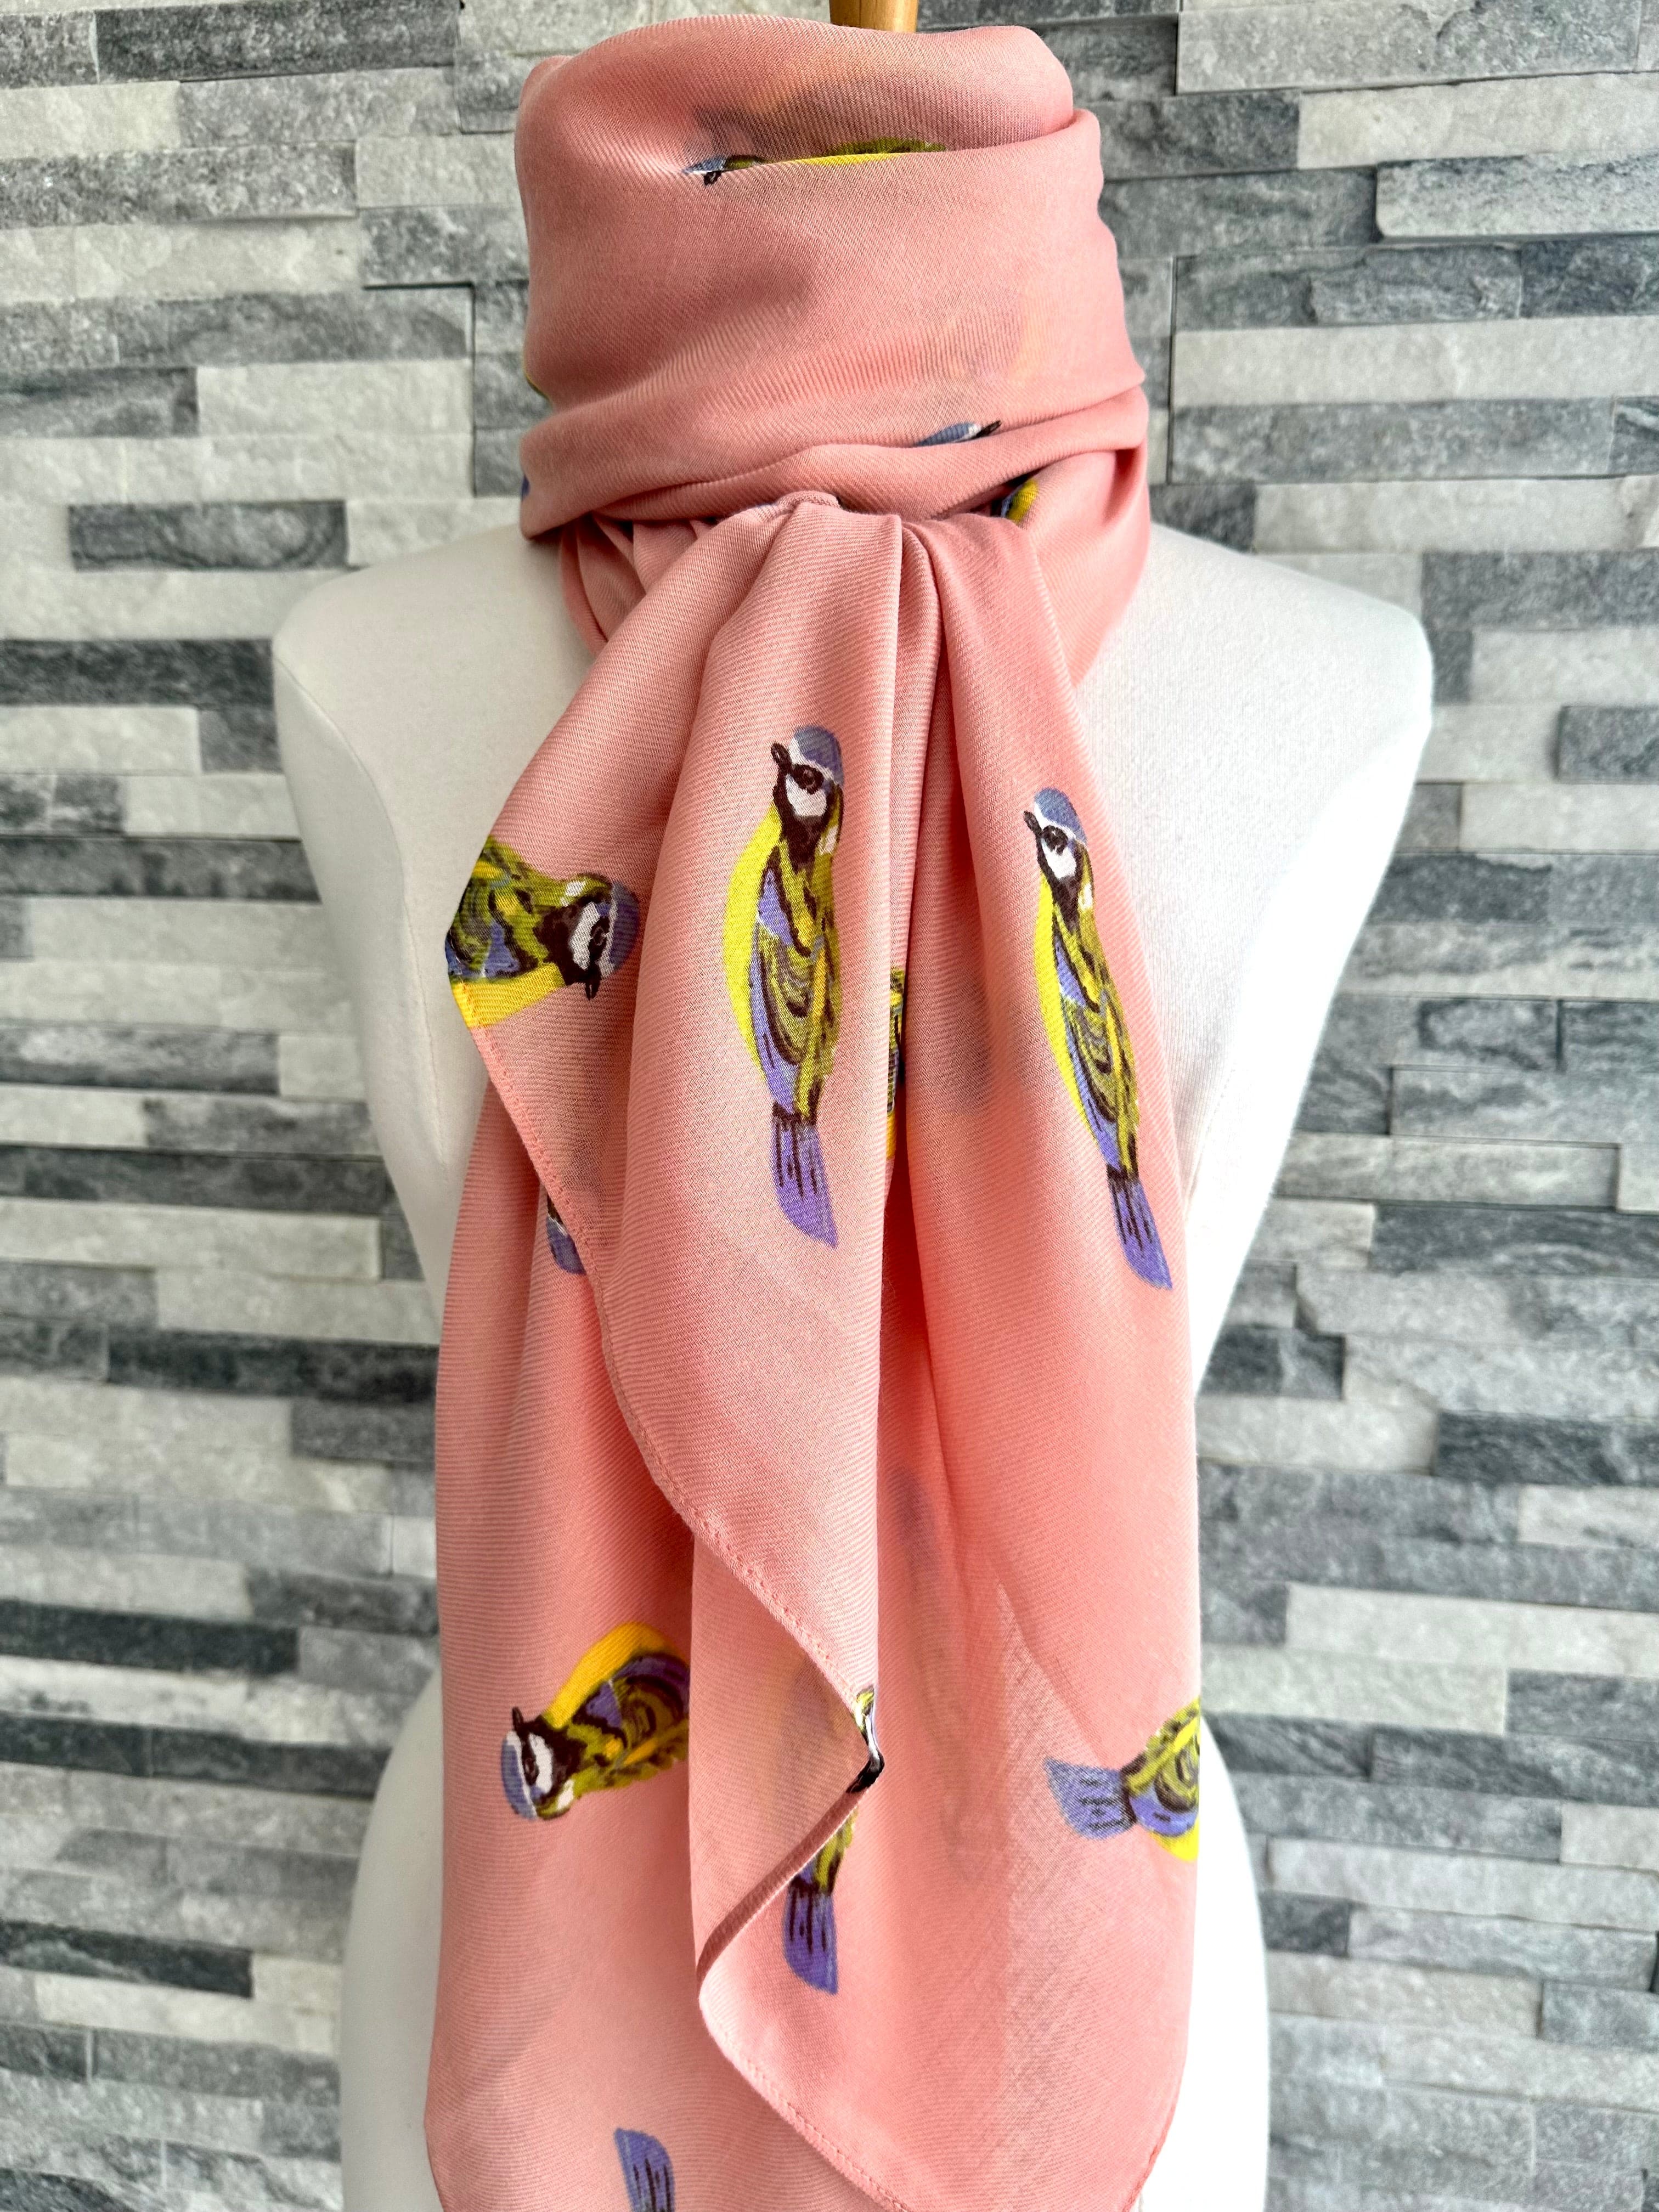 lusciousscarves Ladies Pink Scarf with Blue Tits Design.